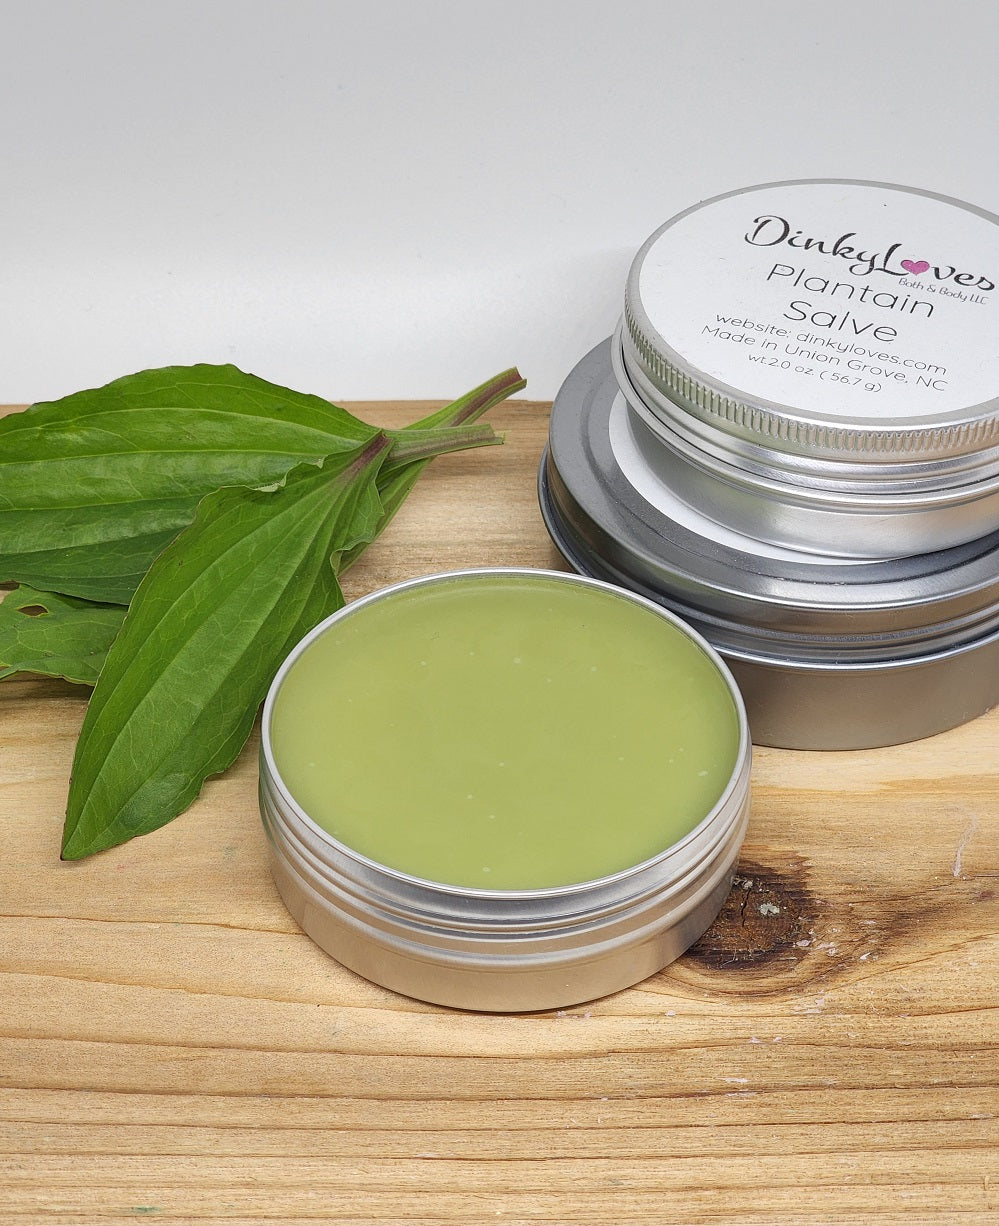 PLANTAIN SALVE / Herbal Salve / Scars / Wounds / Insect Bites